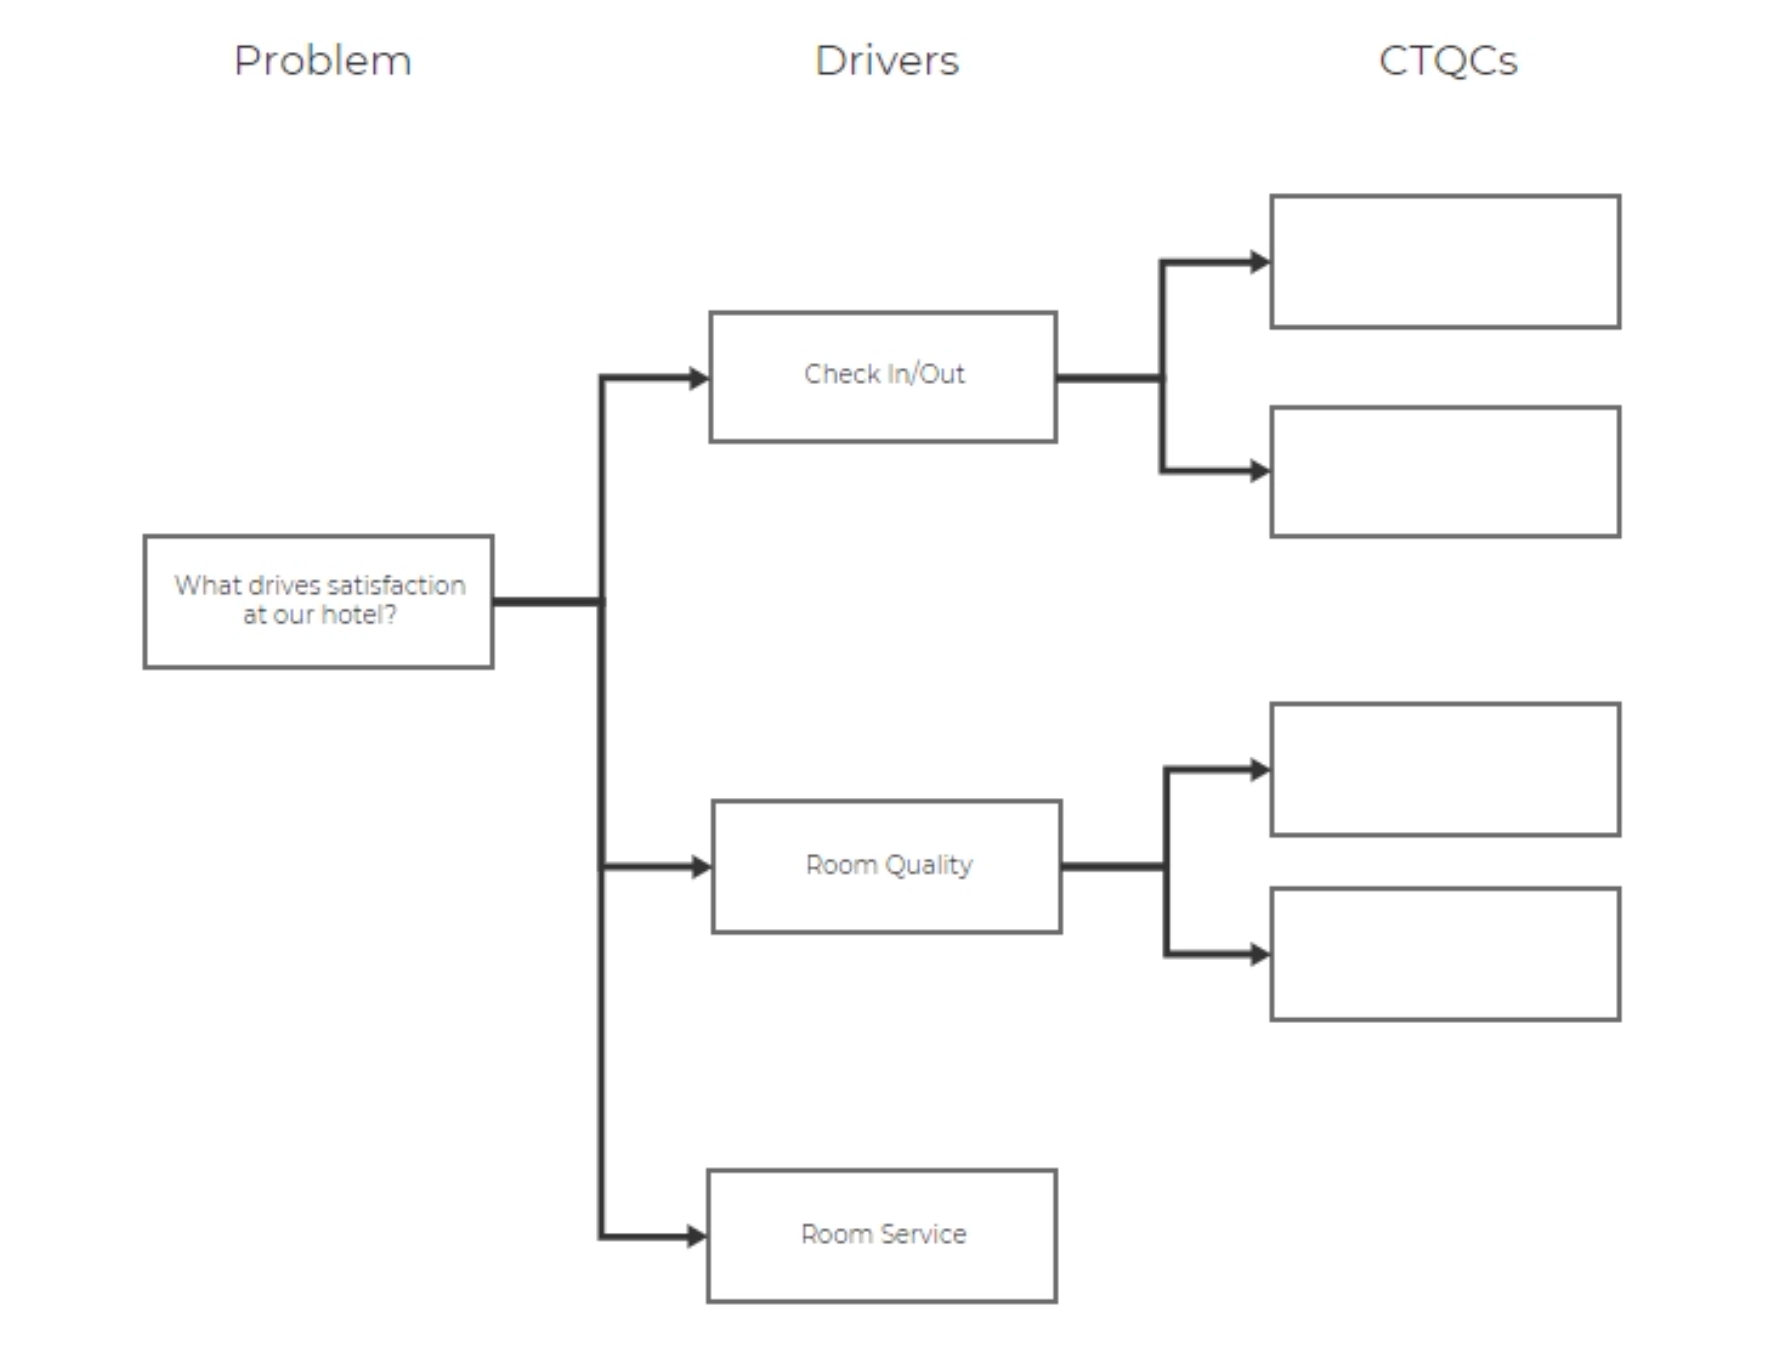 CTQC diagram with problem and Drivers filled out, "Room Service" driver added.